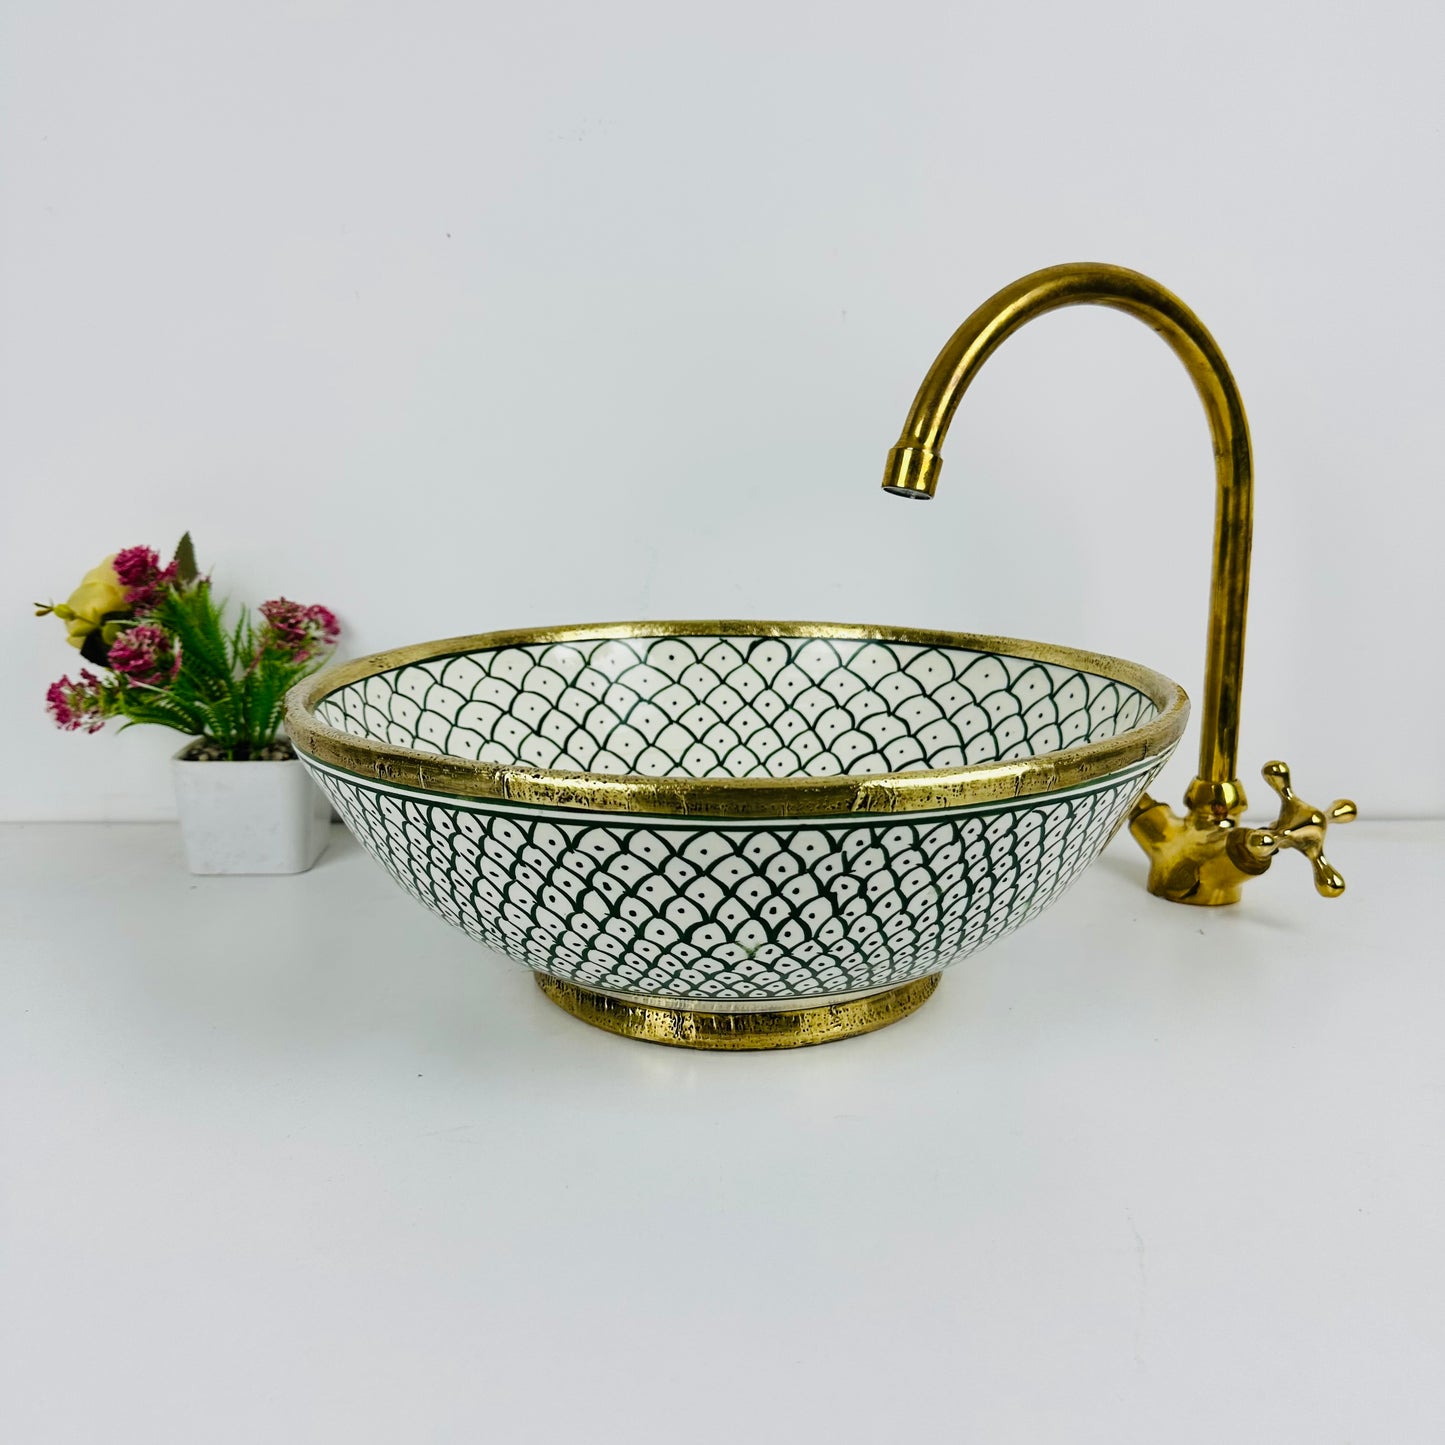 Emerald Xscape: Handcrafted Ceramic Sink with X-Shaped Designs in Green with Brass